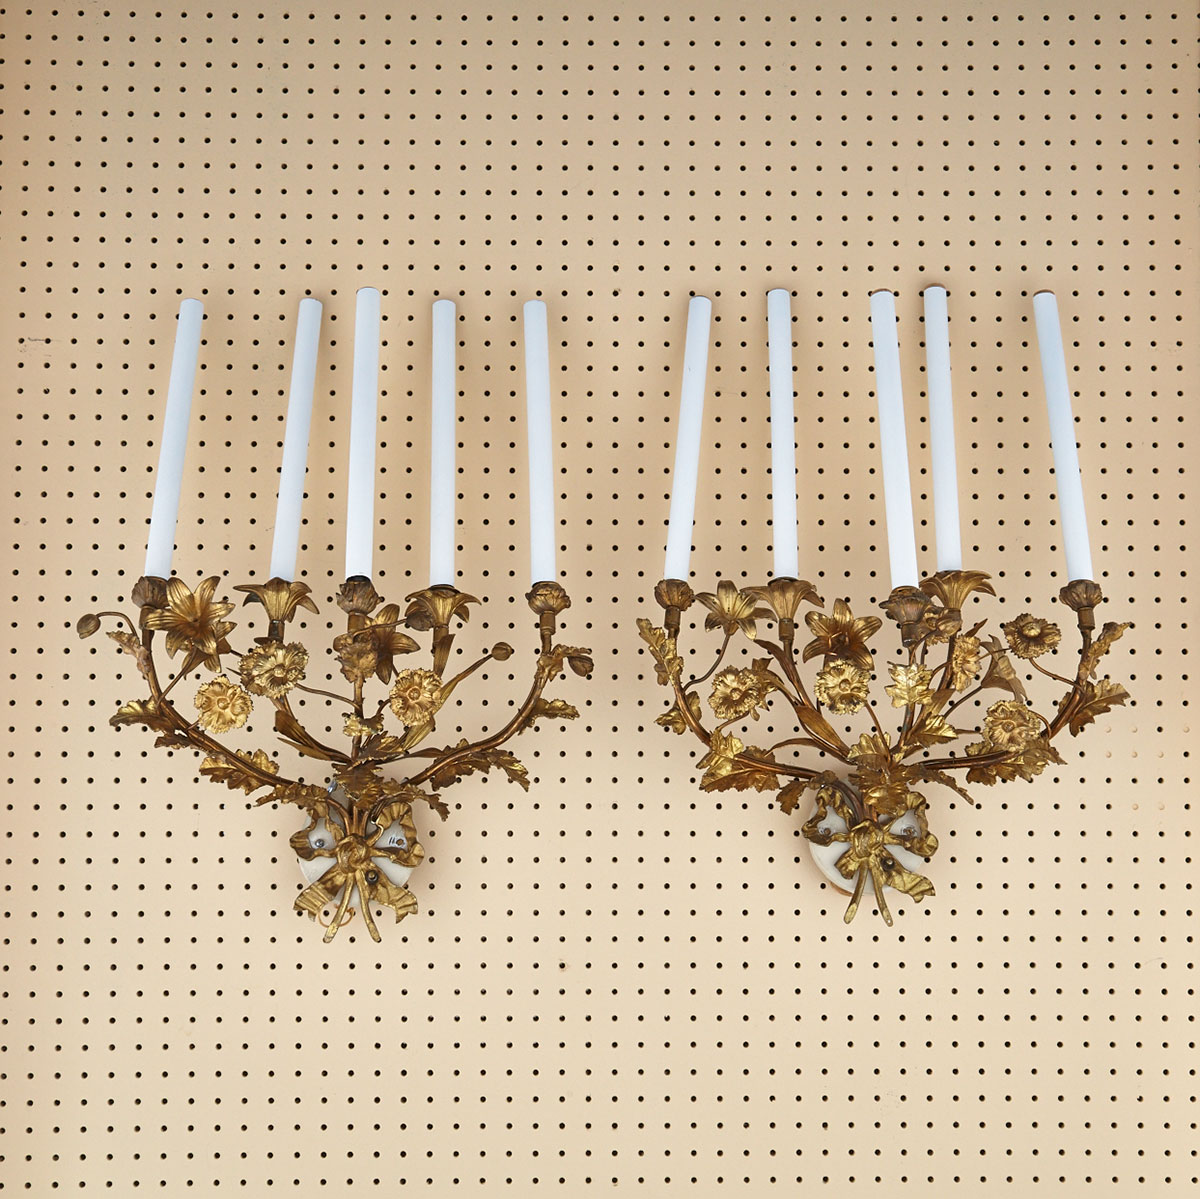 Pair of Gilt Metal Bouquet Form Wall Sconces, 19th/early 20th century